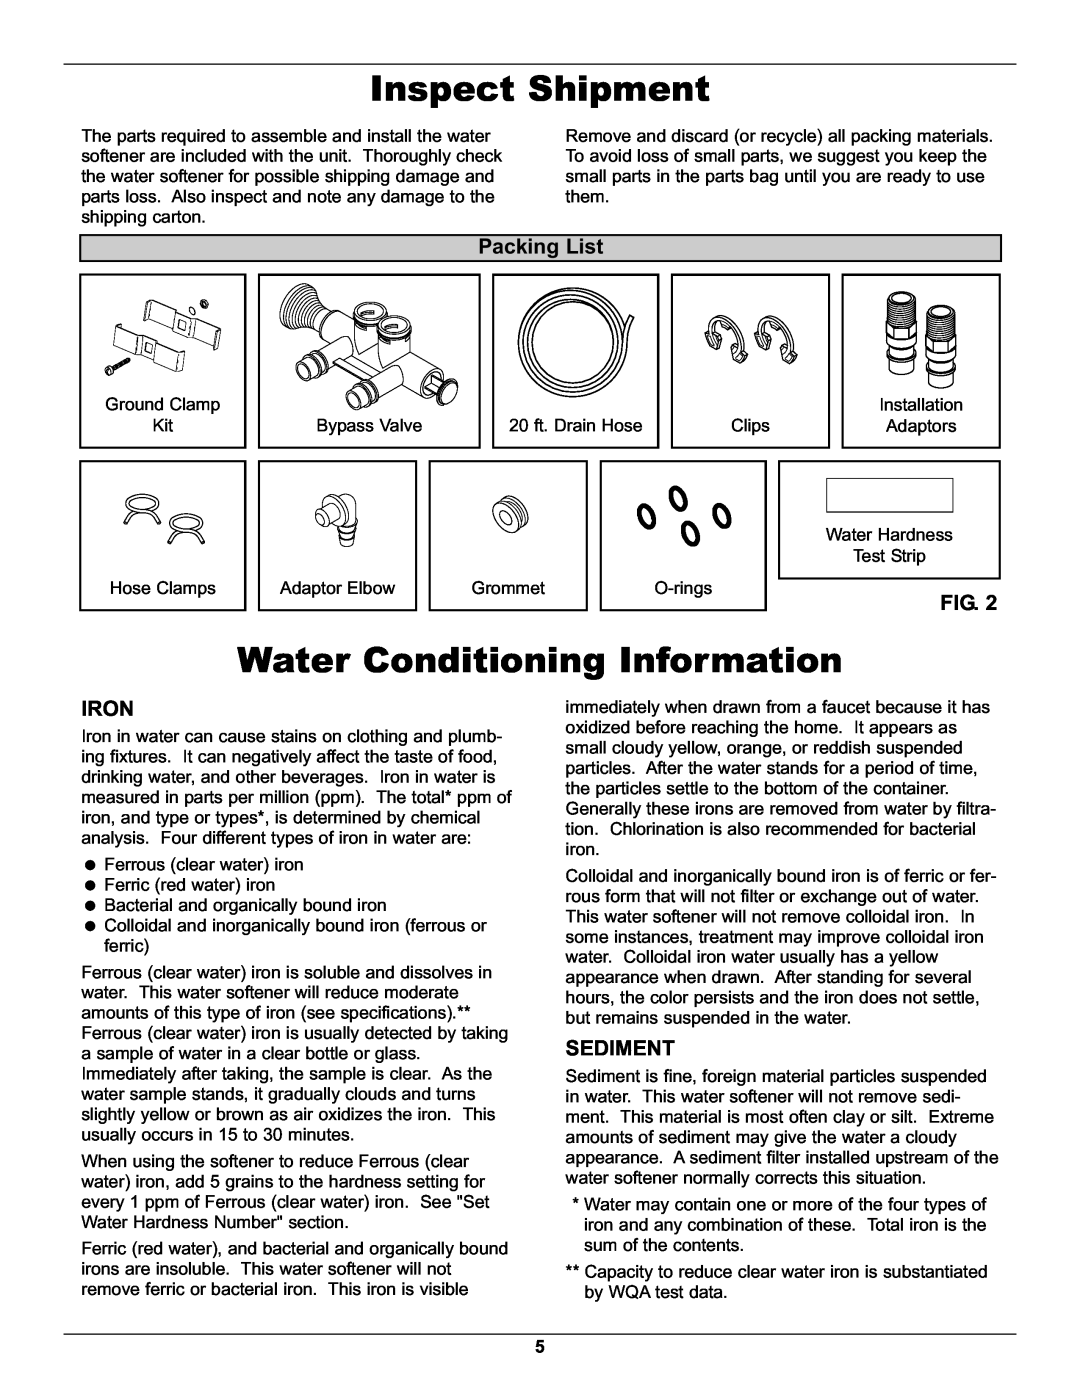 Whirlpool WHES48 operation manual Inspect Shipment, Water Conditioning Information, Iron, Sediment, Fig 